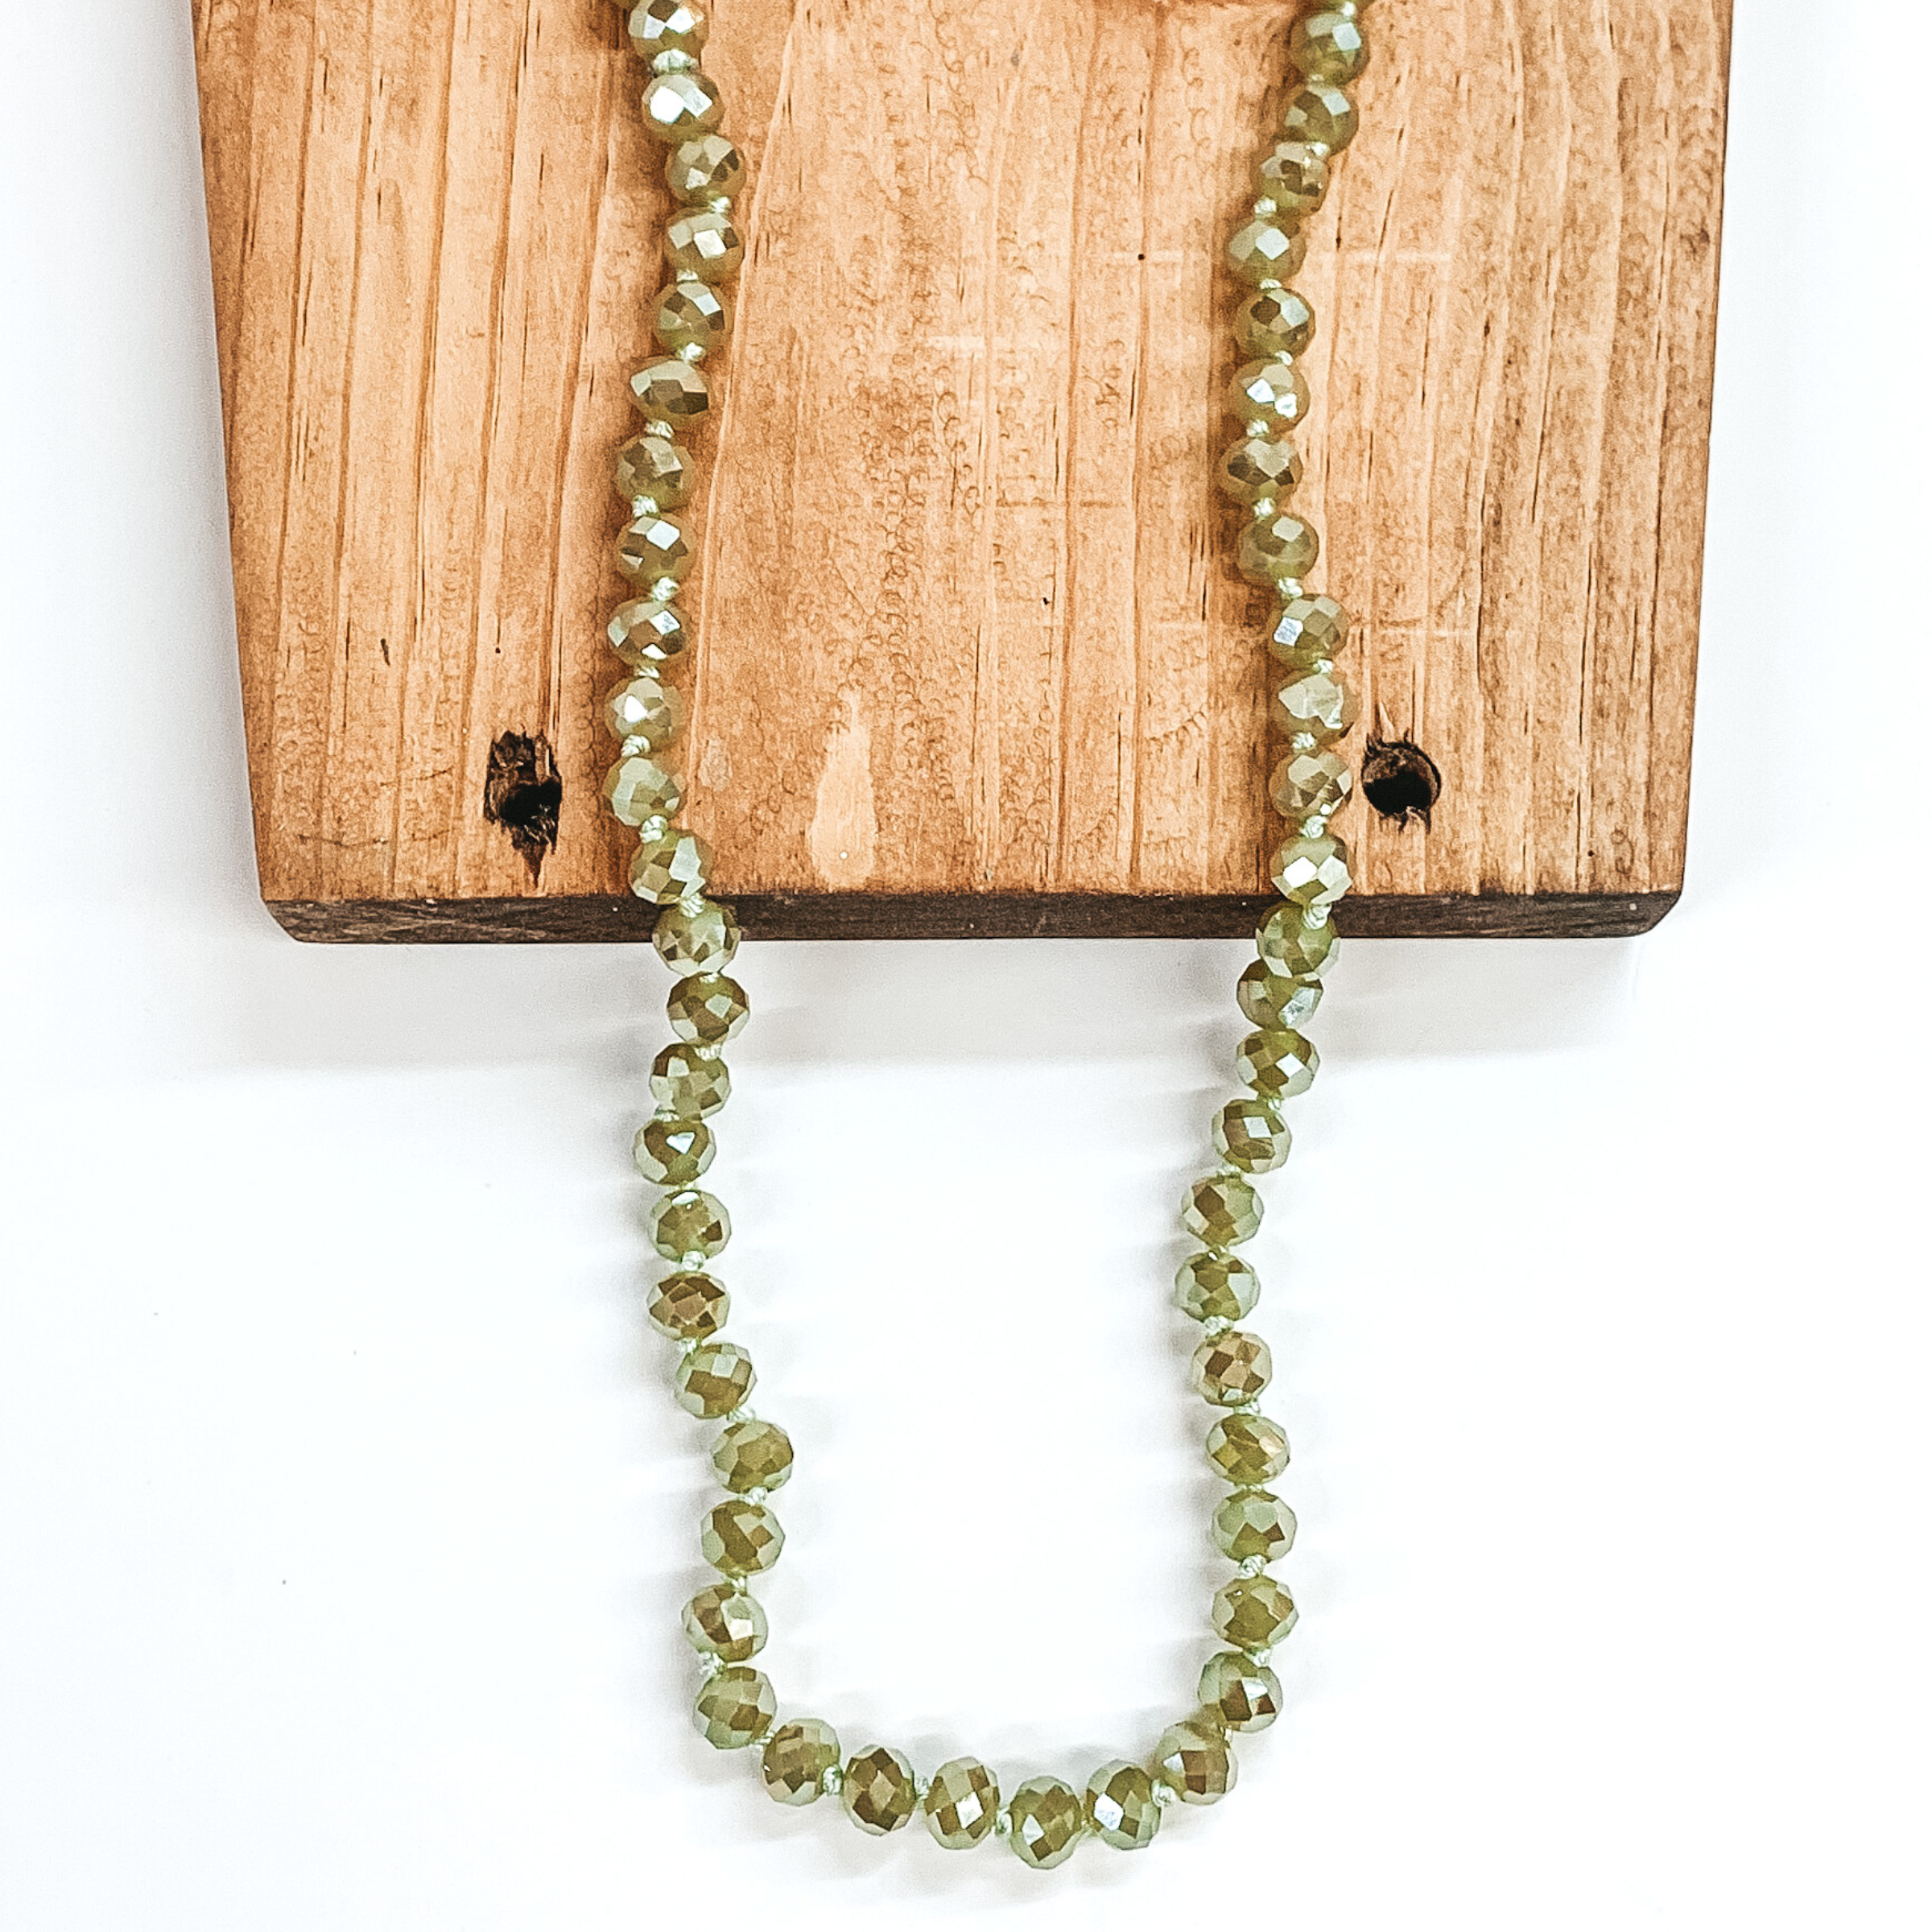 Sage green crystal beaded necklace. This necklace is pictured on a brown block on a white background. 